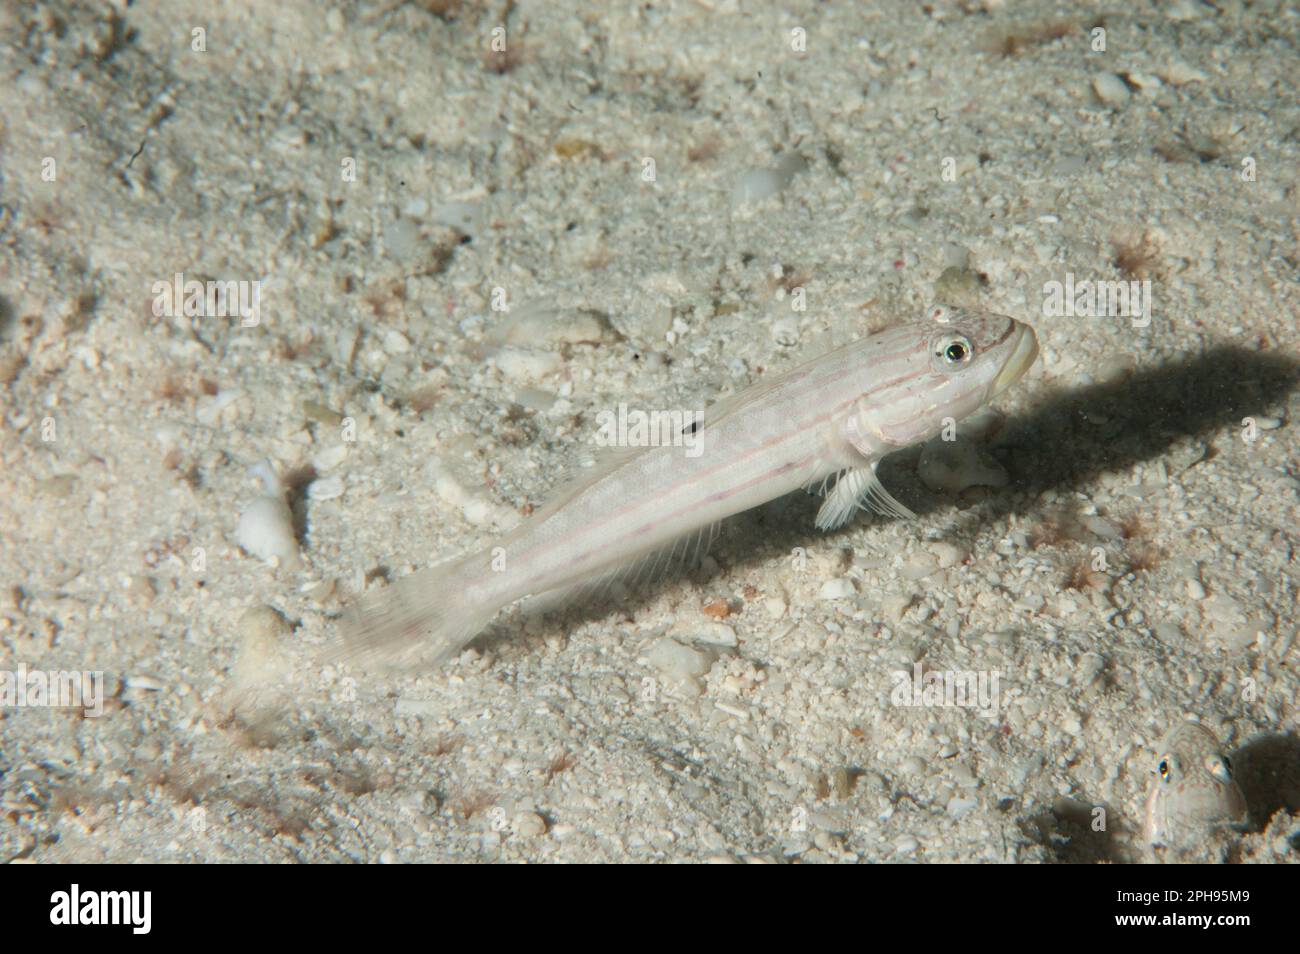 Mural Goby, Valenciennea muralis, by hole, Raja Ampat, West Papua, Indonesia Stock Photo